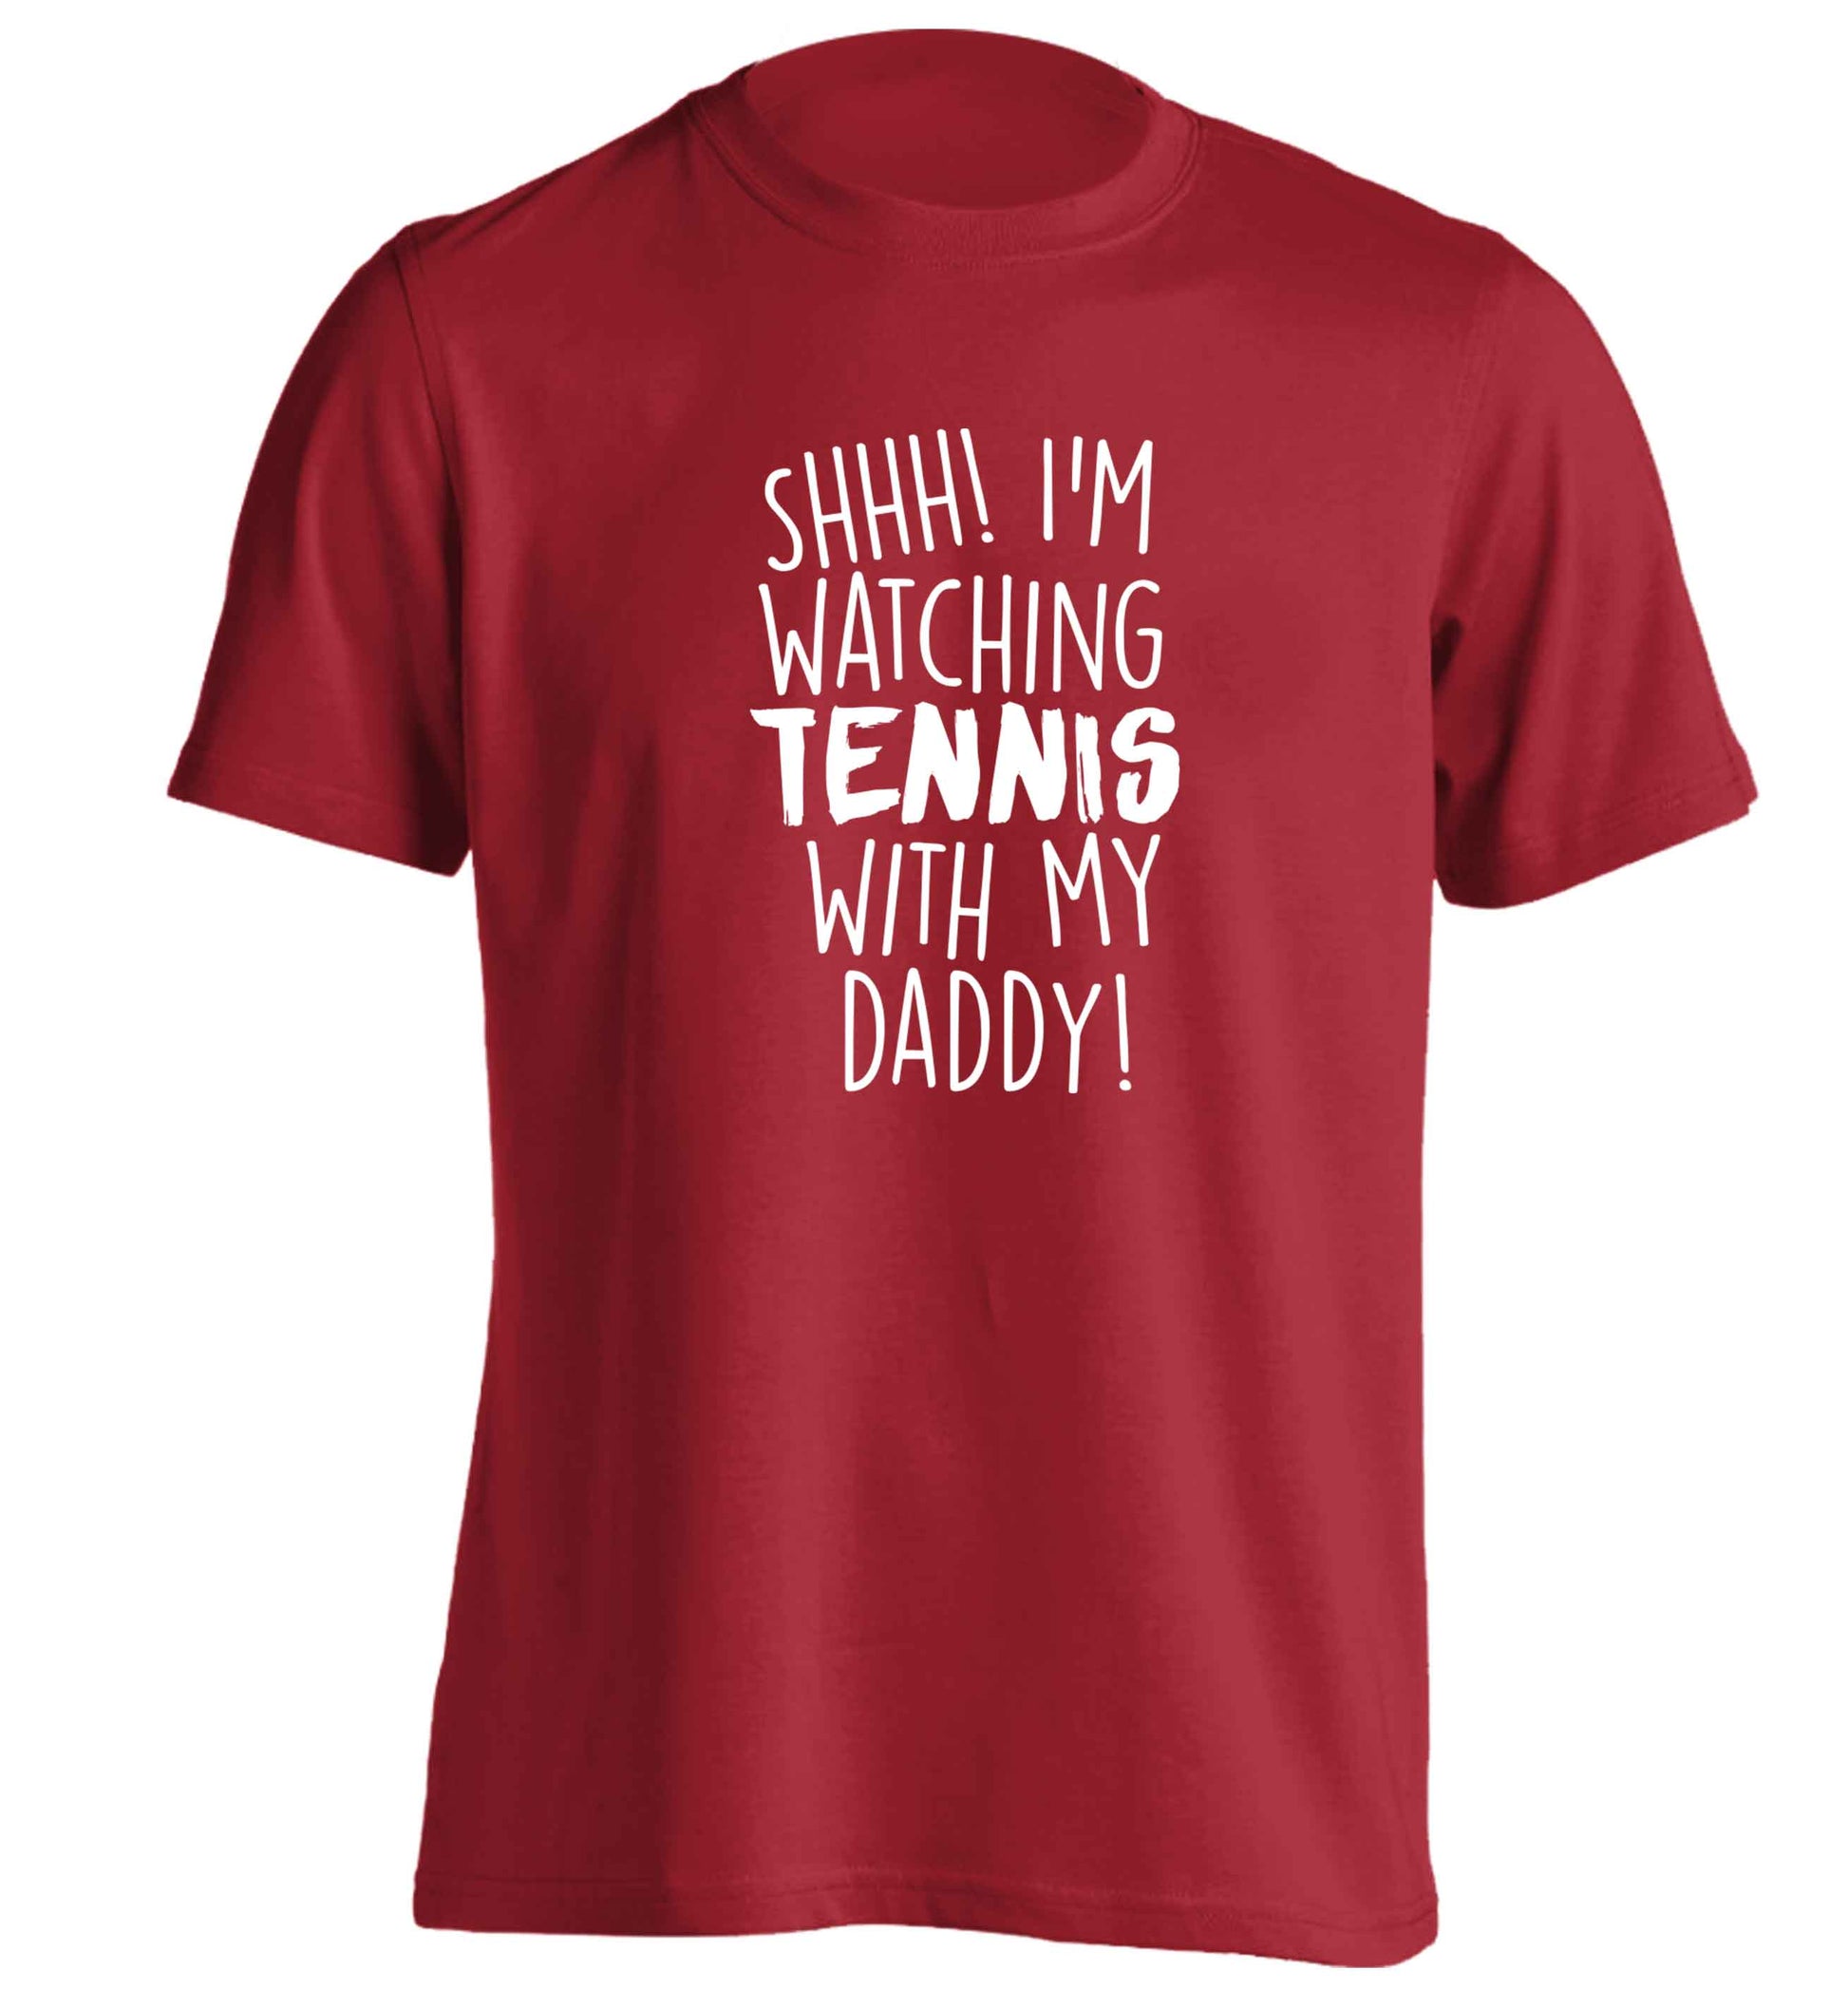 Shh! I'm watching tennis with my daddy! adults unisex red Tshirt 2XL